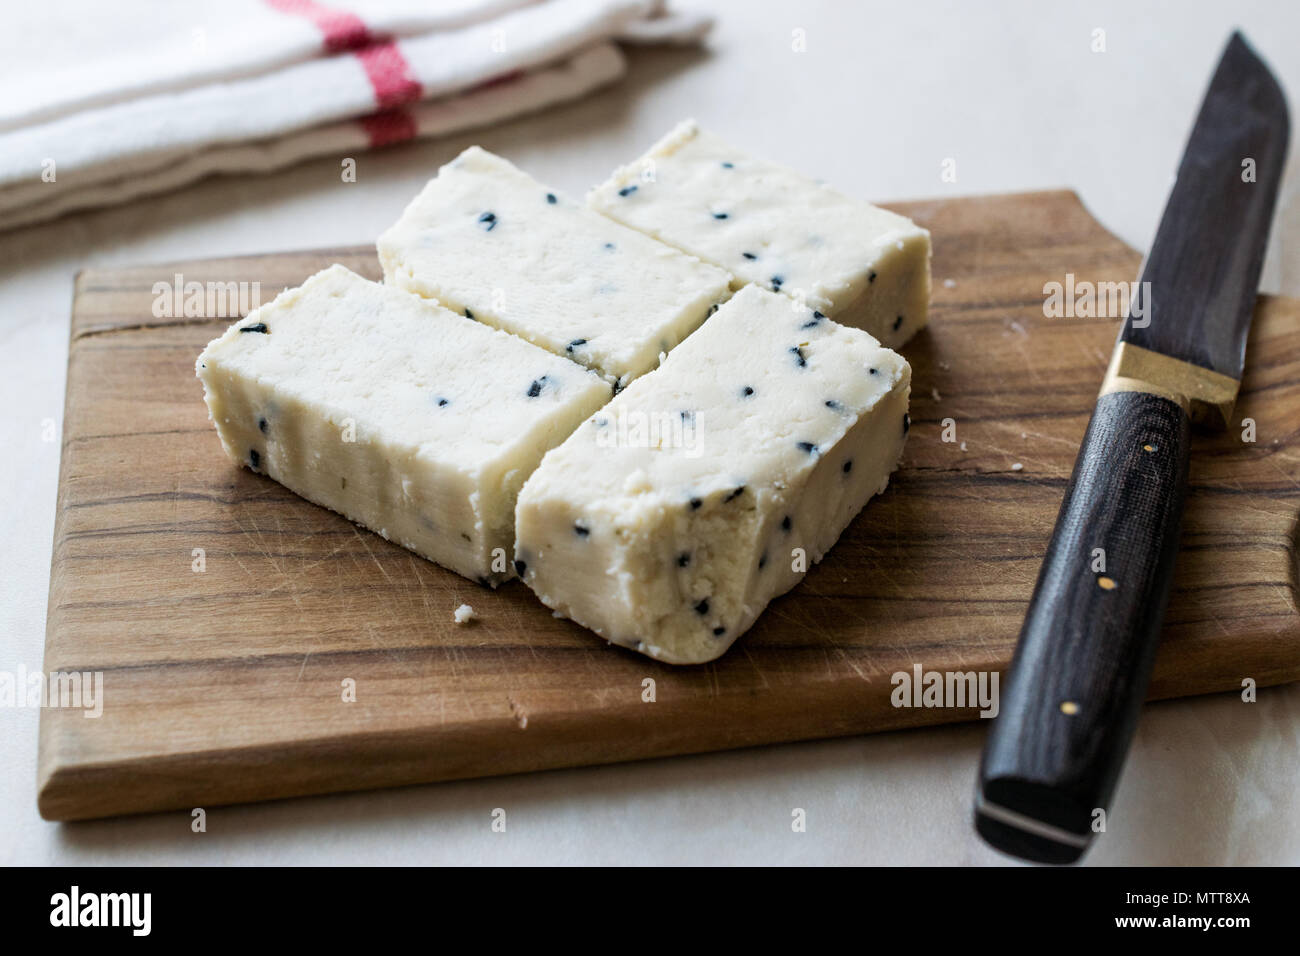 Turkish Feta Cheese with Black Cumin (Sesame) Seeds on Wooden Surface with Knife. Traditional Organic Food. Stock Photo